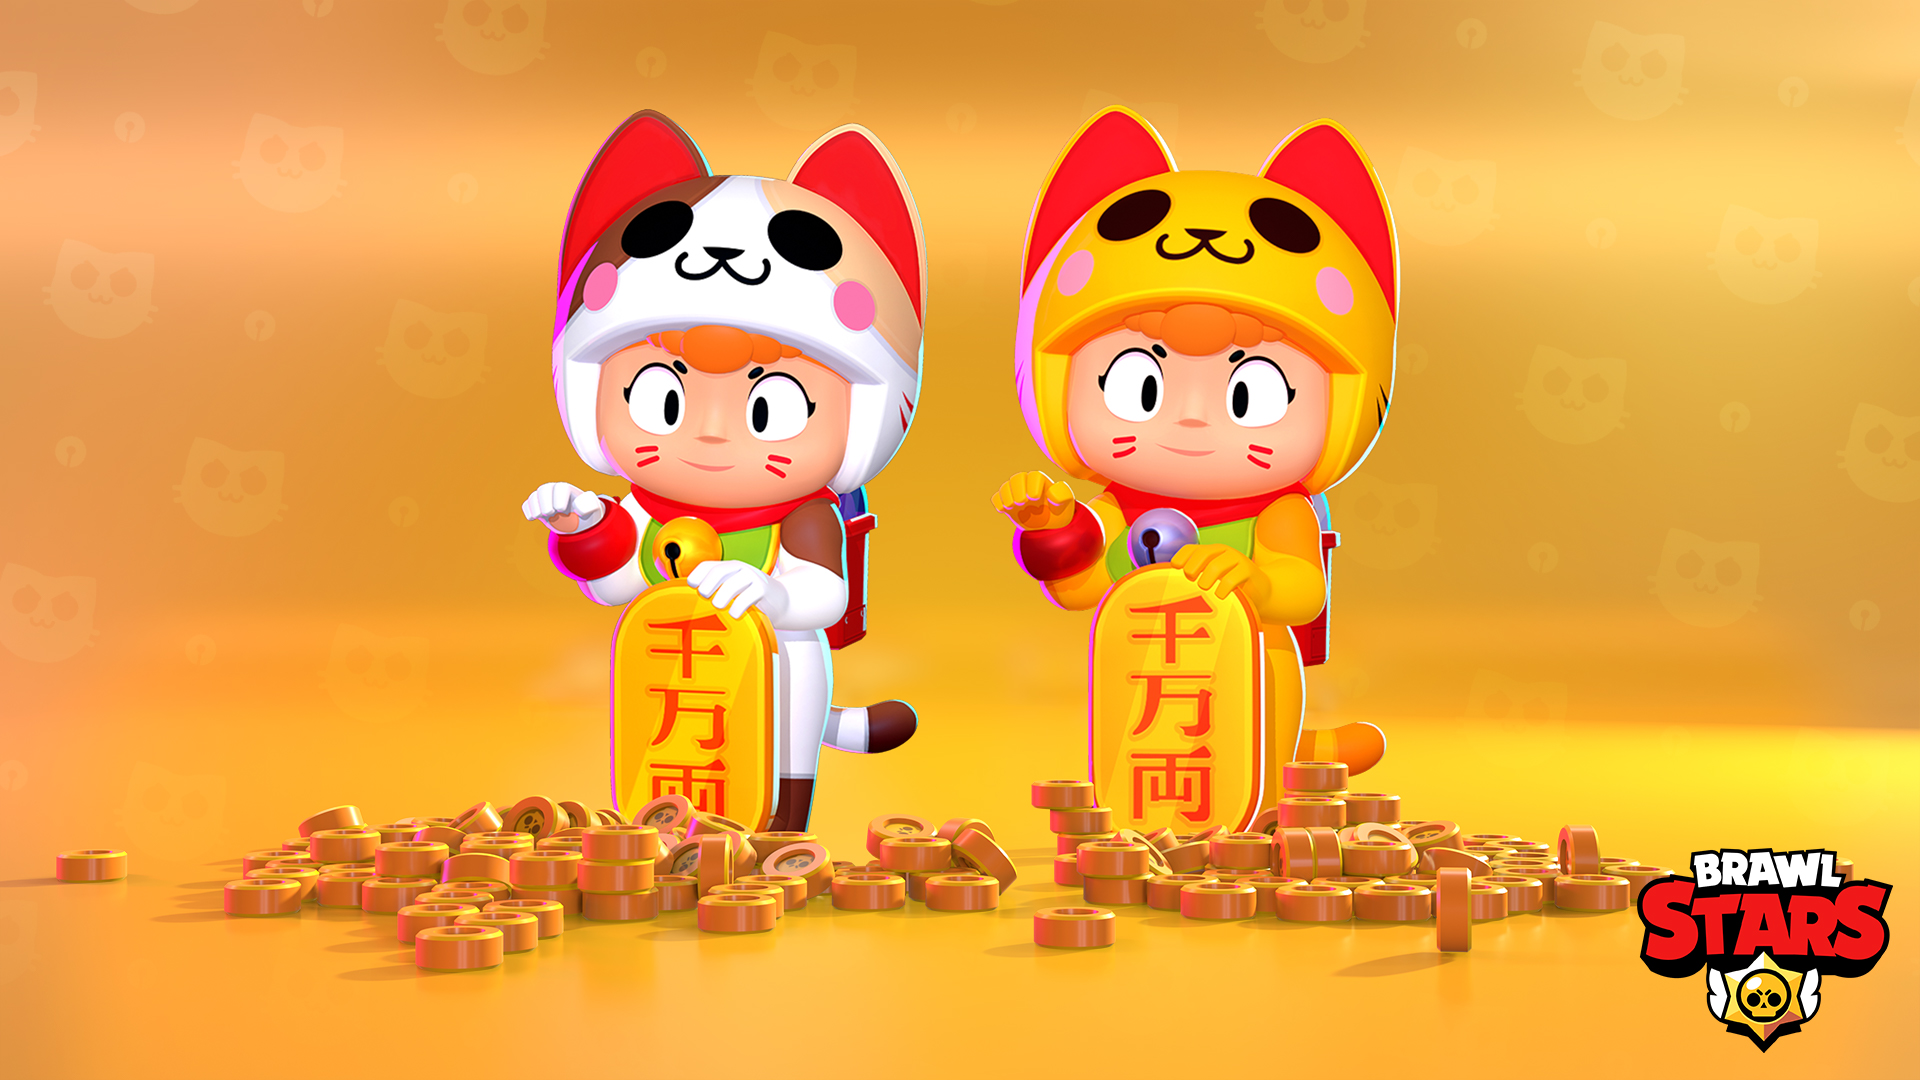 Brawl Stars On Twitter The Legend Says That Neko Bea Brings Happiness And Wealth If You Have It It Also Brings Free Coins To The Shop Get Yours Now Https T Co Svbesqrjiu - legends brawl stars code